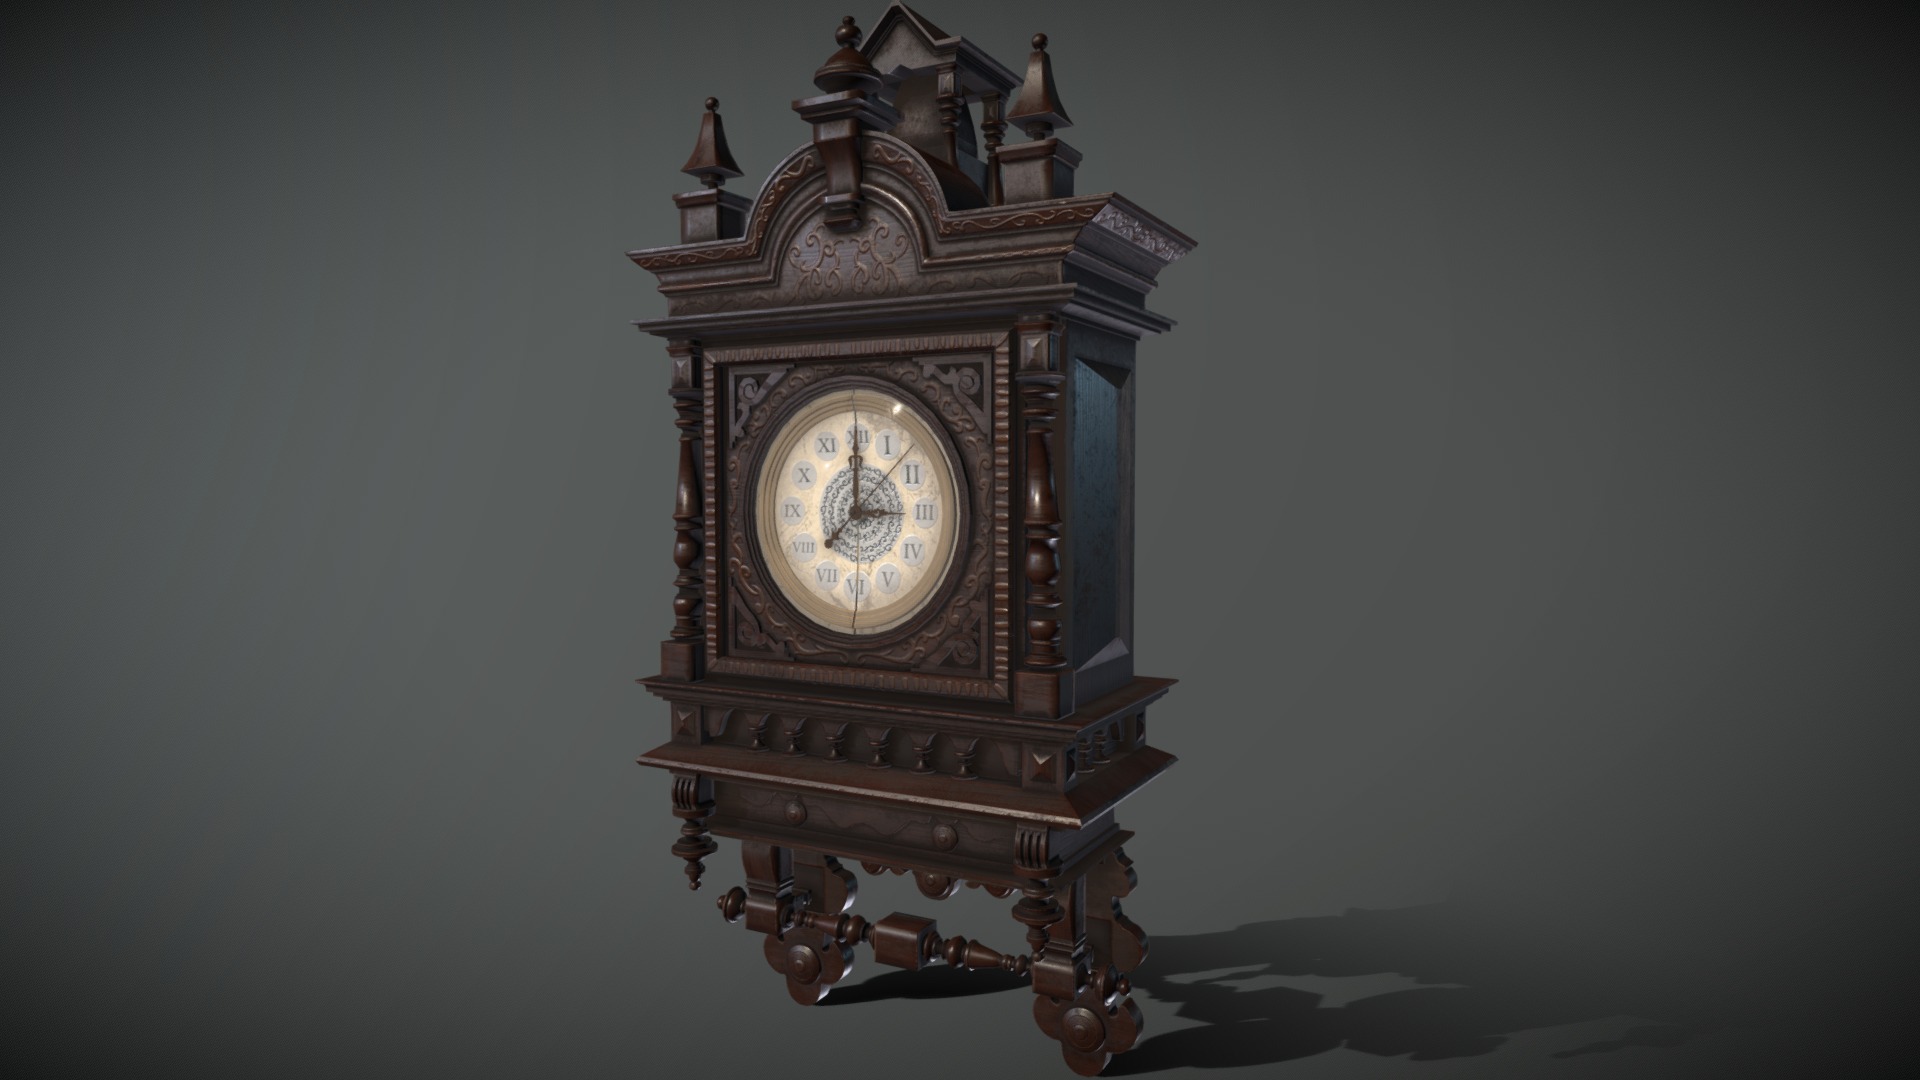 This is a 3d model of a victorian old cuckoo clock 3d model made entirely in blender and textured in substance painter, hope you liike it! - Victorian Old Cuckoo Clock 3D Model - 3D model by IPfuentes 3d model